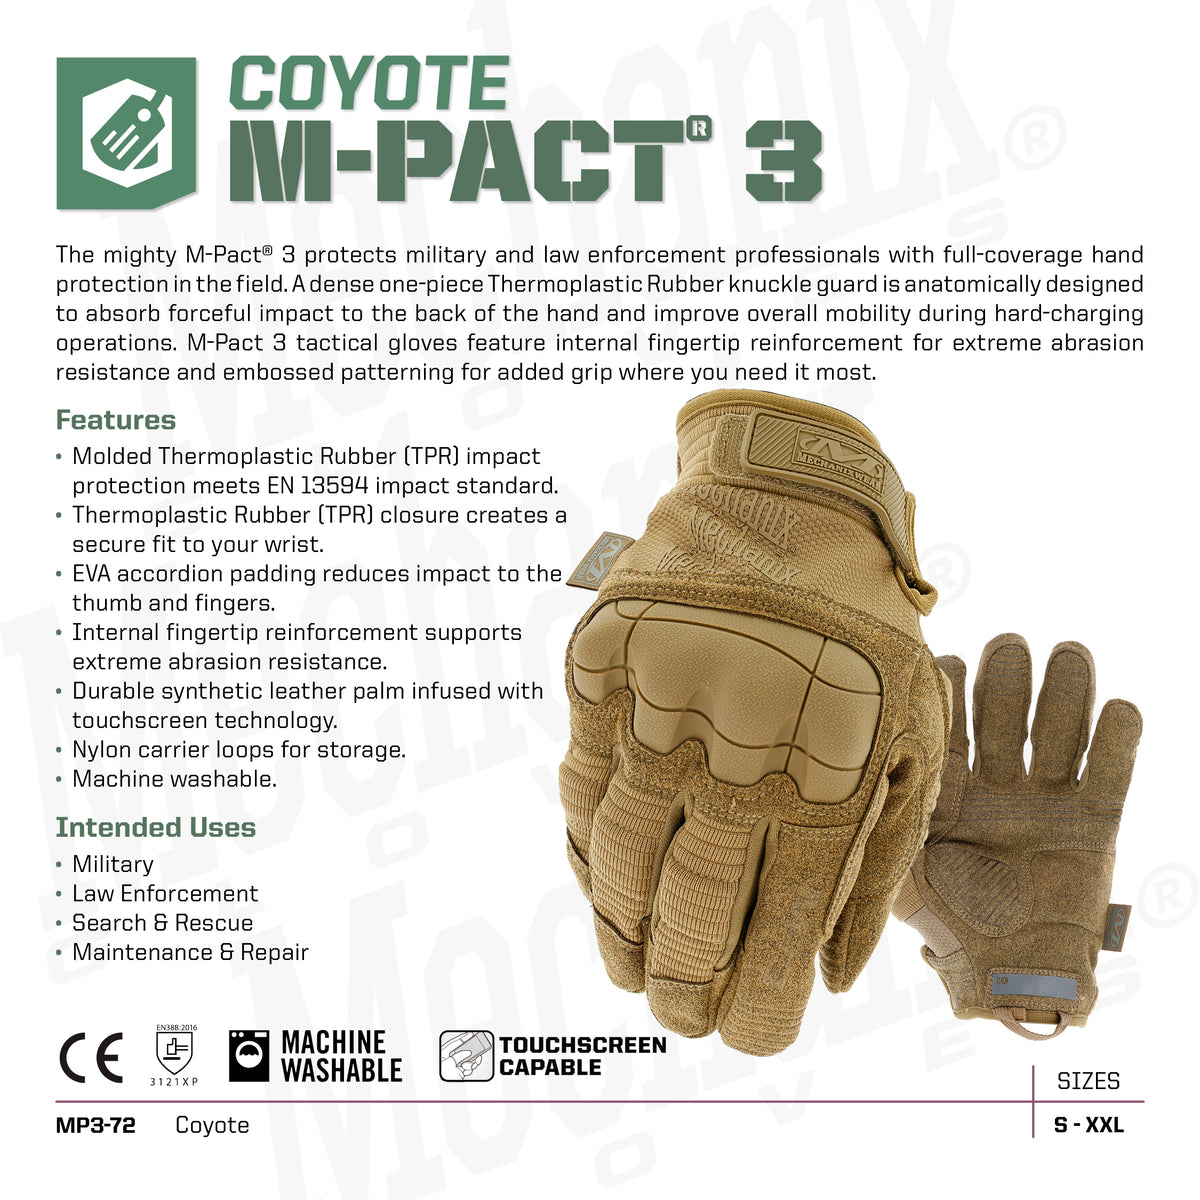 M-Pact 3 Coyote - Bellmt